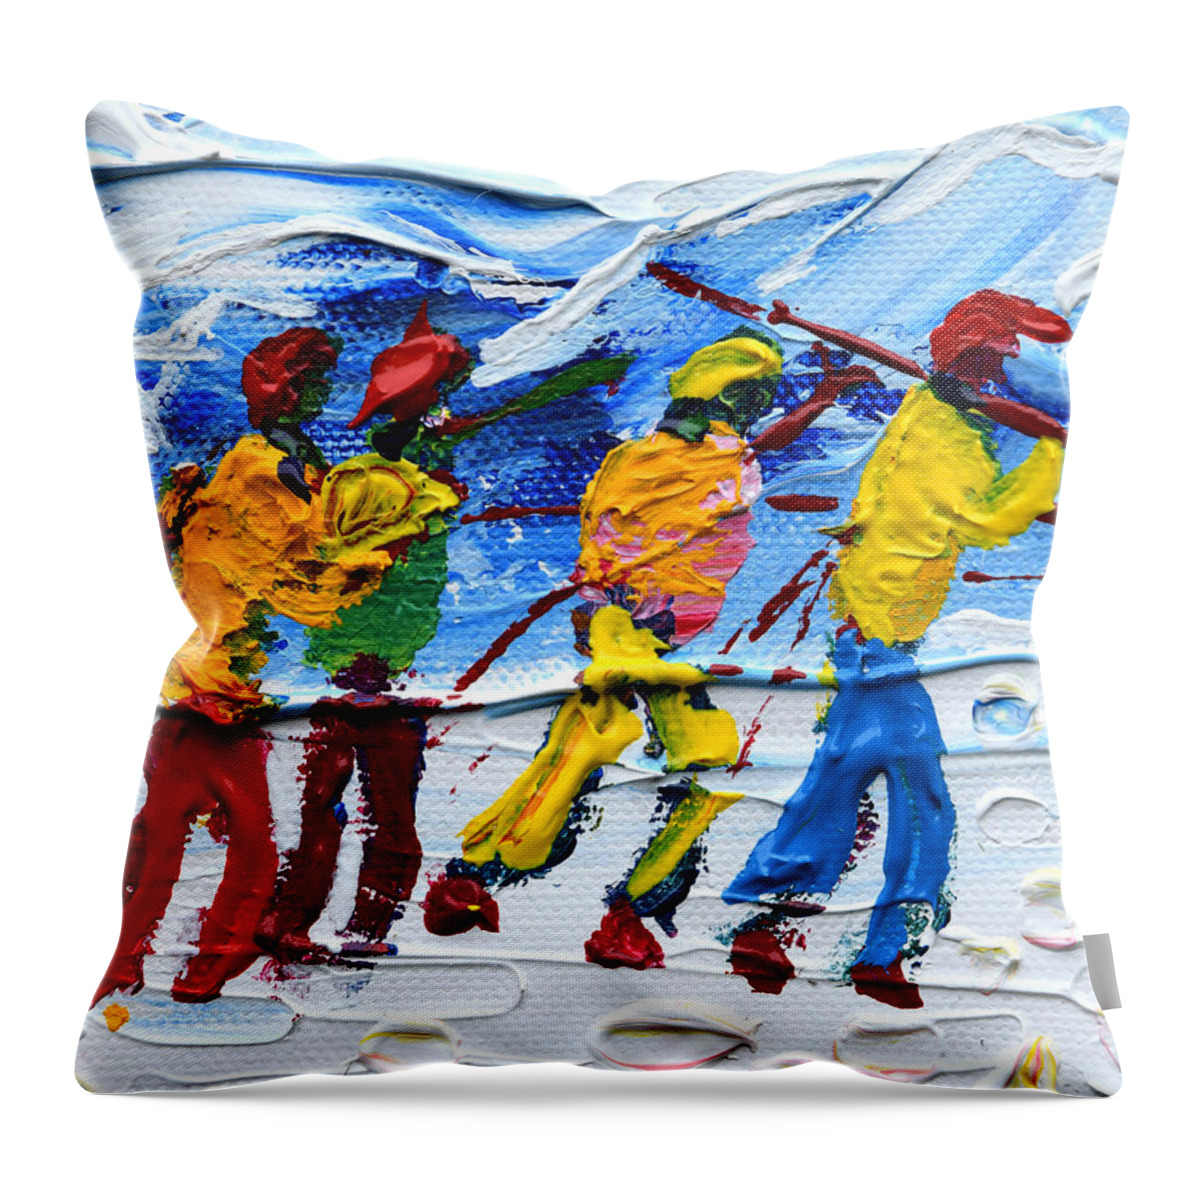 Skiing Throw Pillow featuring the painting Off To Ski We Go by Pete Caswell